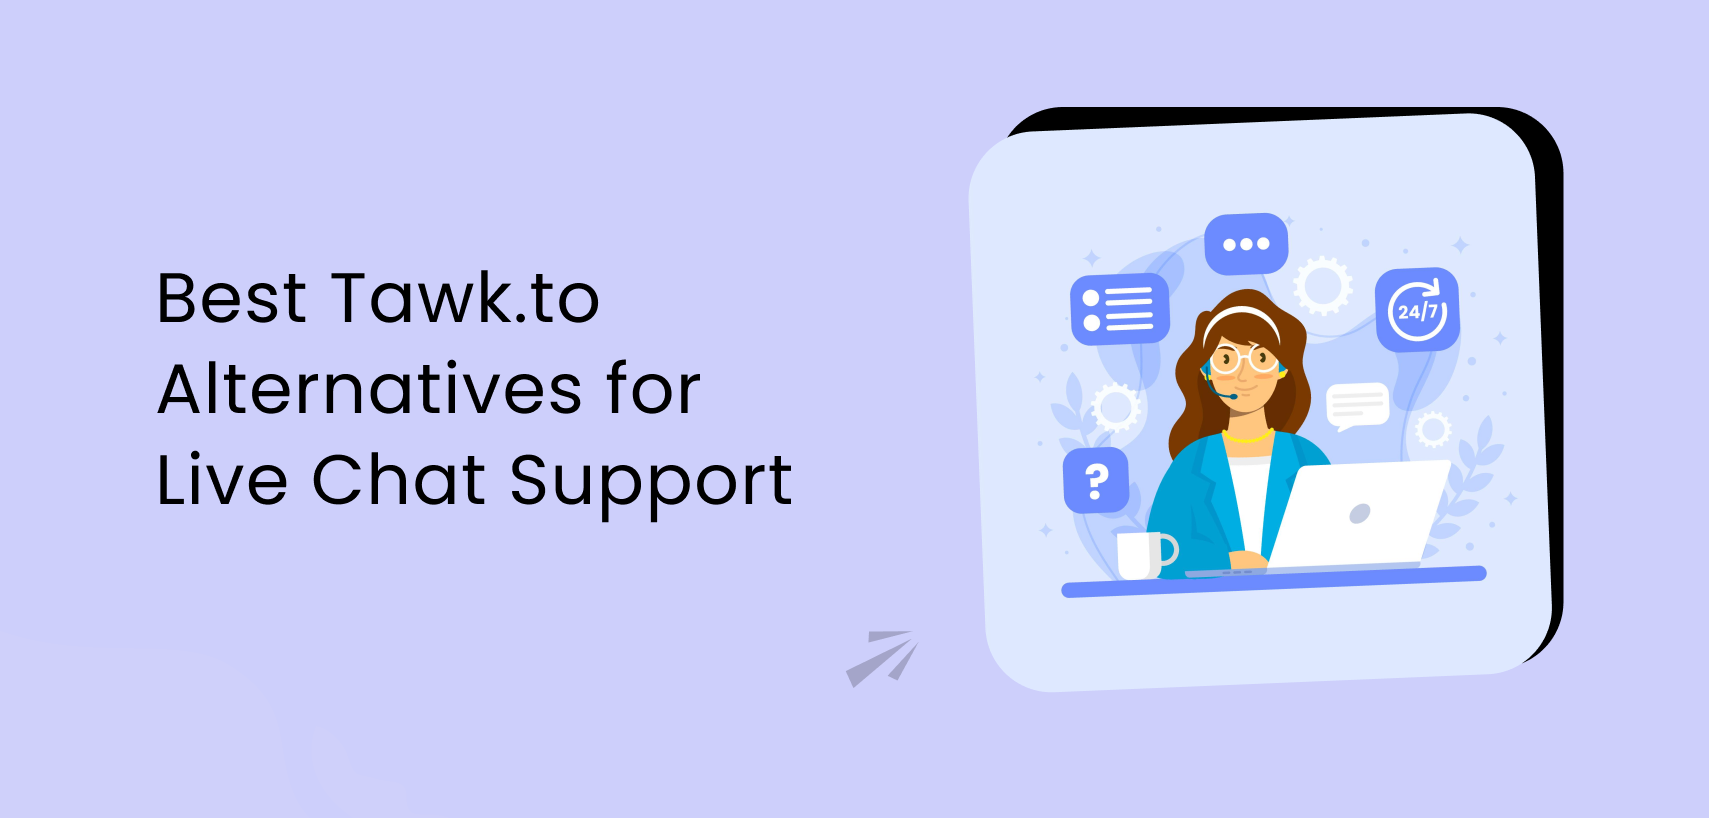 Best Tawk.to Alternatives for Live Chat Support